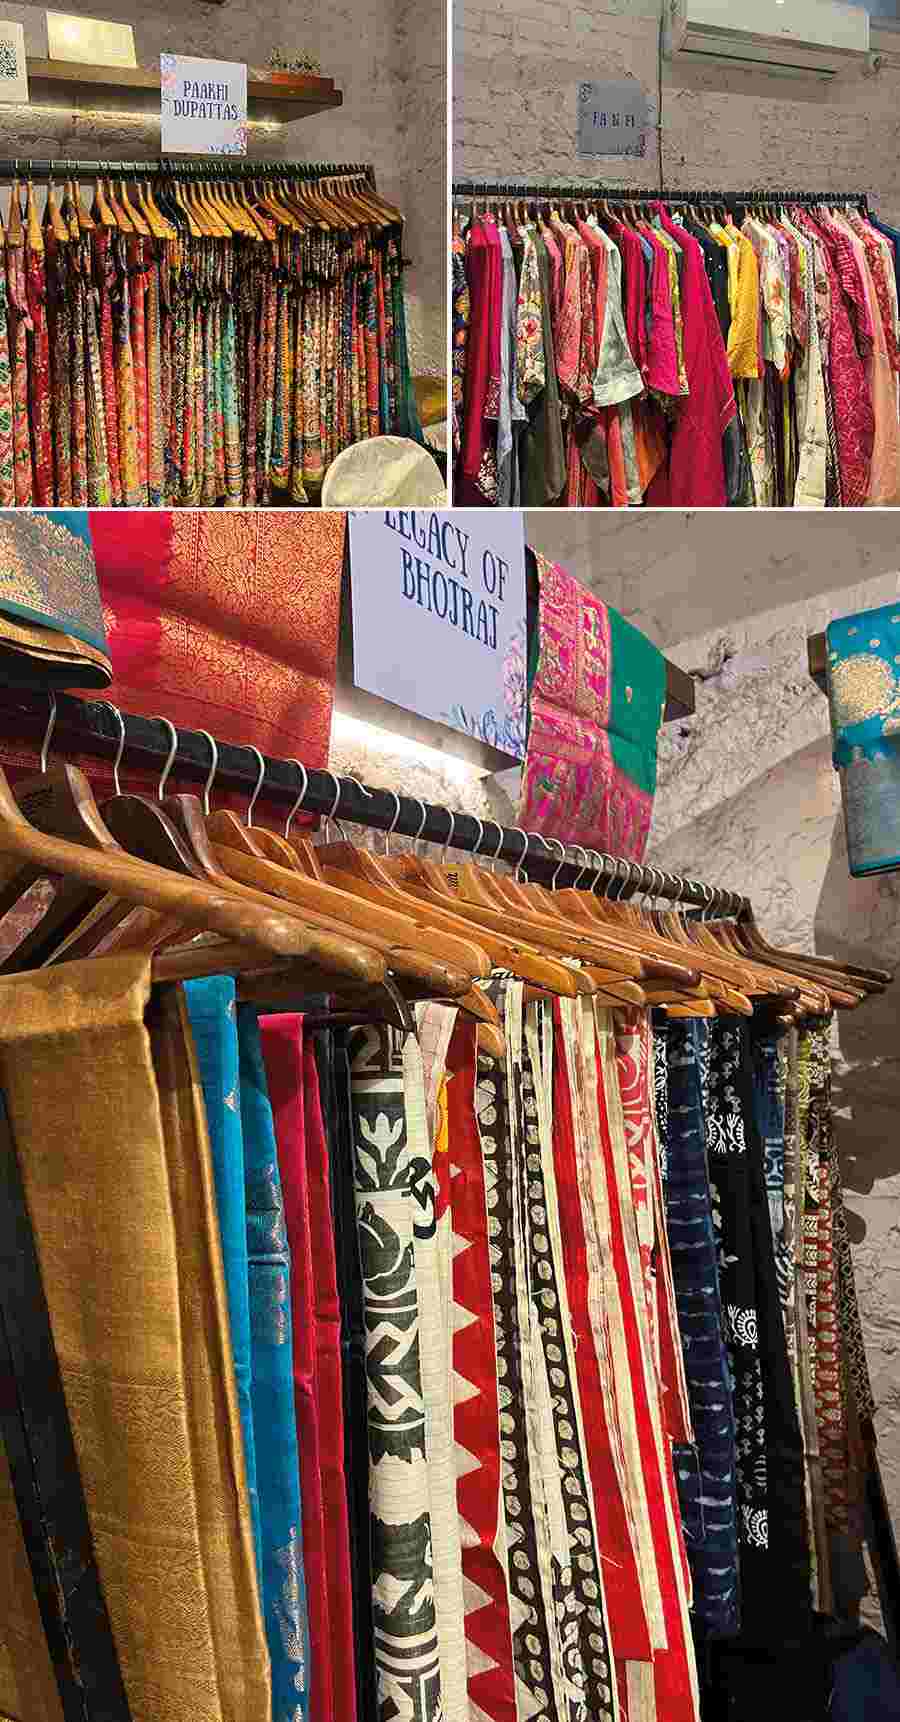 Clothing brands Paakhi Dupattas and Fa n FI showcased modern Indian wear and accessories. While Paakhi Dupattas had a beautiful range of embroidered and mirror-work collections, Legacy of Bhojraj had handloom saris — from Gadwal to Narayanpet, Mangalgiri and Kanjeevaram — on display